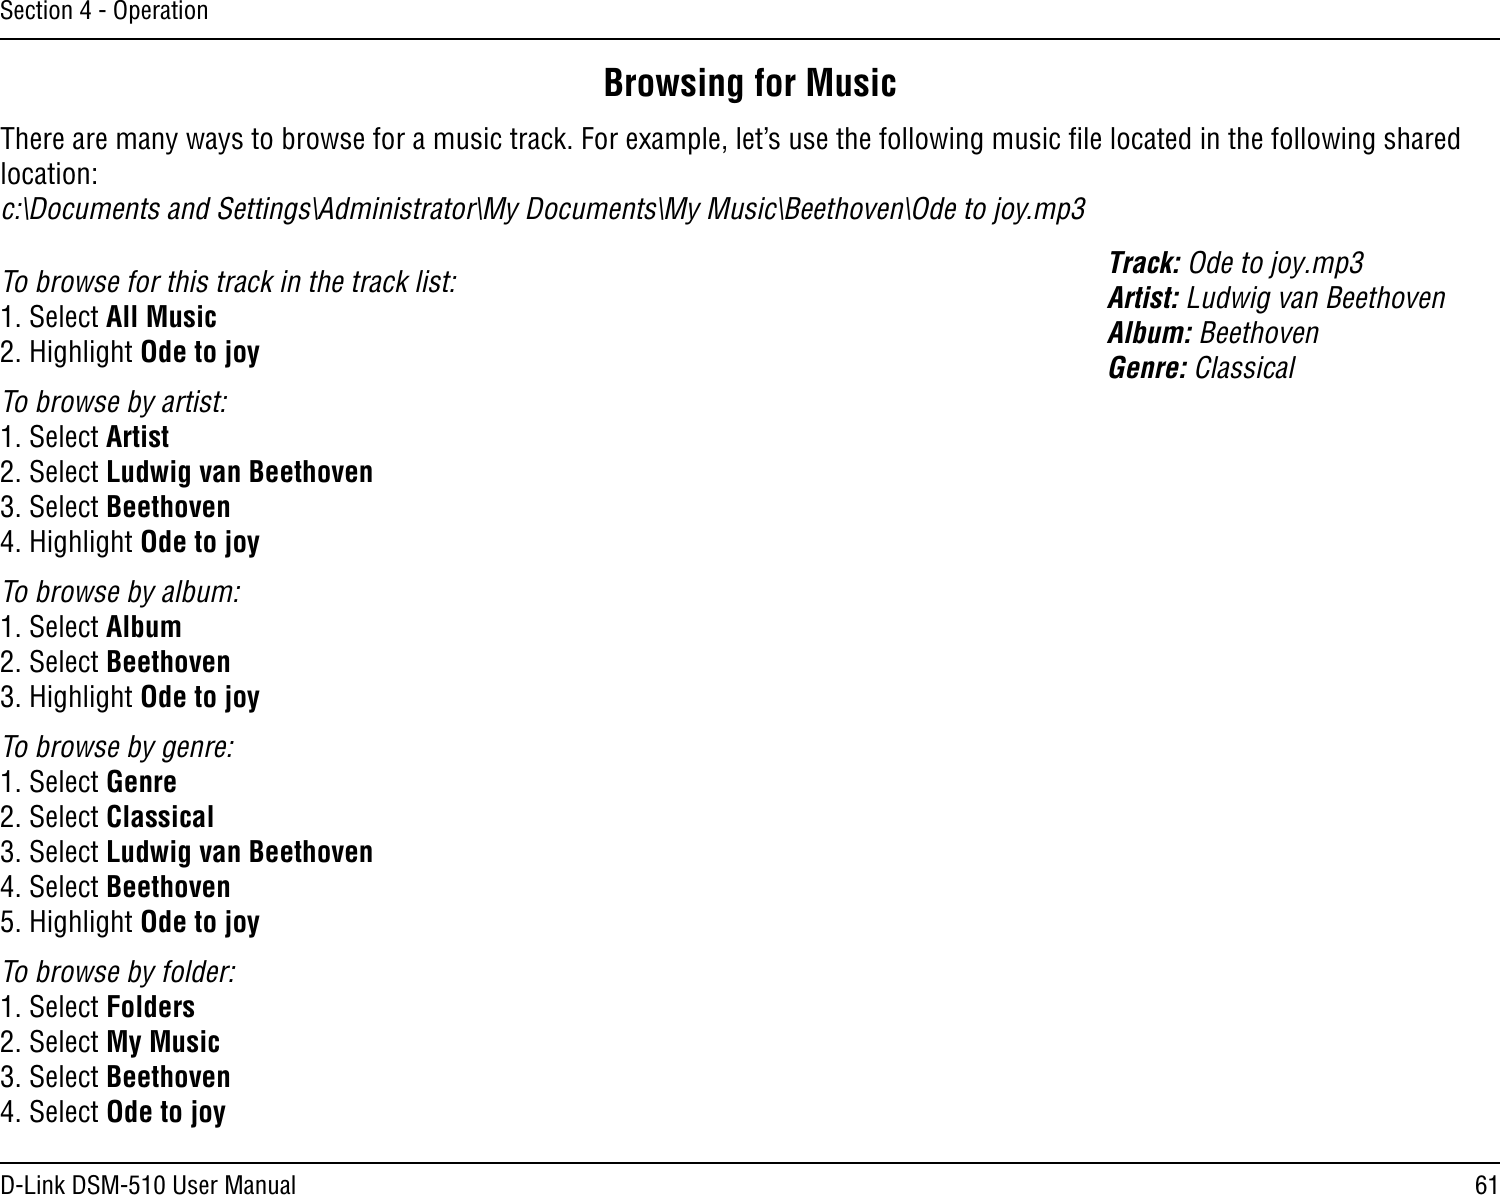 61D-Link DSM-510 User ManualSection 4 - OperationBrowsing for MusicThere are many ways to browse for a music track. For example, let’s use the following music ﬁle located in the following shared location: c:\Documents and Settings\Administrator\My Documents\My Music\Beethoven\Ode to joy.mp3Track: Ode to joy.mp3Artist: Ludwig van BeethovenAlbum: BeethovenGenre: ClassicalTo browse for this track in the track list:1. Select All Music2. Highlight Ode to joyTo browse by artist:1. Select Artist2. Select Ludwig van Beethoven3. Select Beethoven4. Highlight Ode to joyTo browse by album:1. Select Album2. Select Beethoven3. Highlight Ode to joyTo browse by genre:1. Select Genre2. Select Classical3. Select Ludwig van Beethoven4. Select Beethoven5. Highlight Ode to joyTo browse by folder:1. Select Folders2. Select My Music3. Select Beethoven4. Select Ode to joy